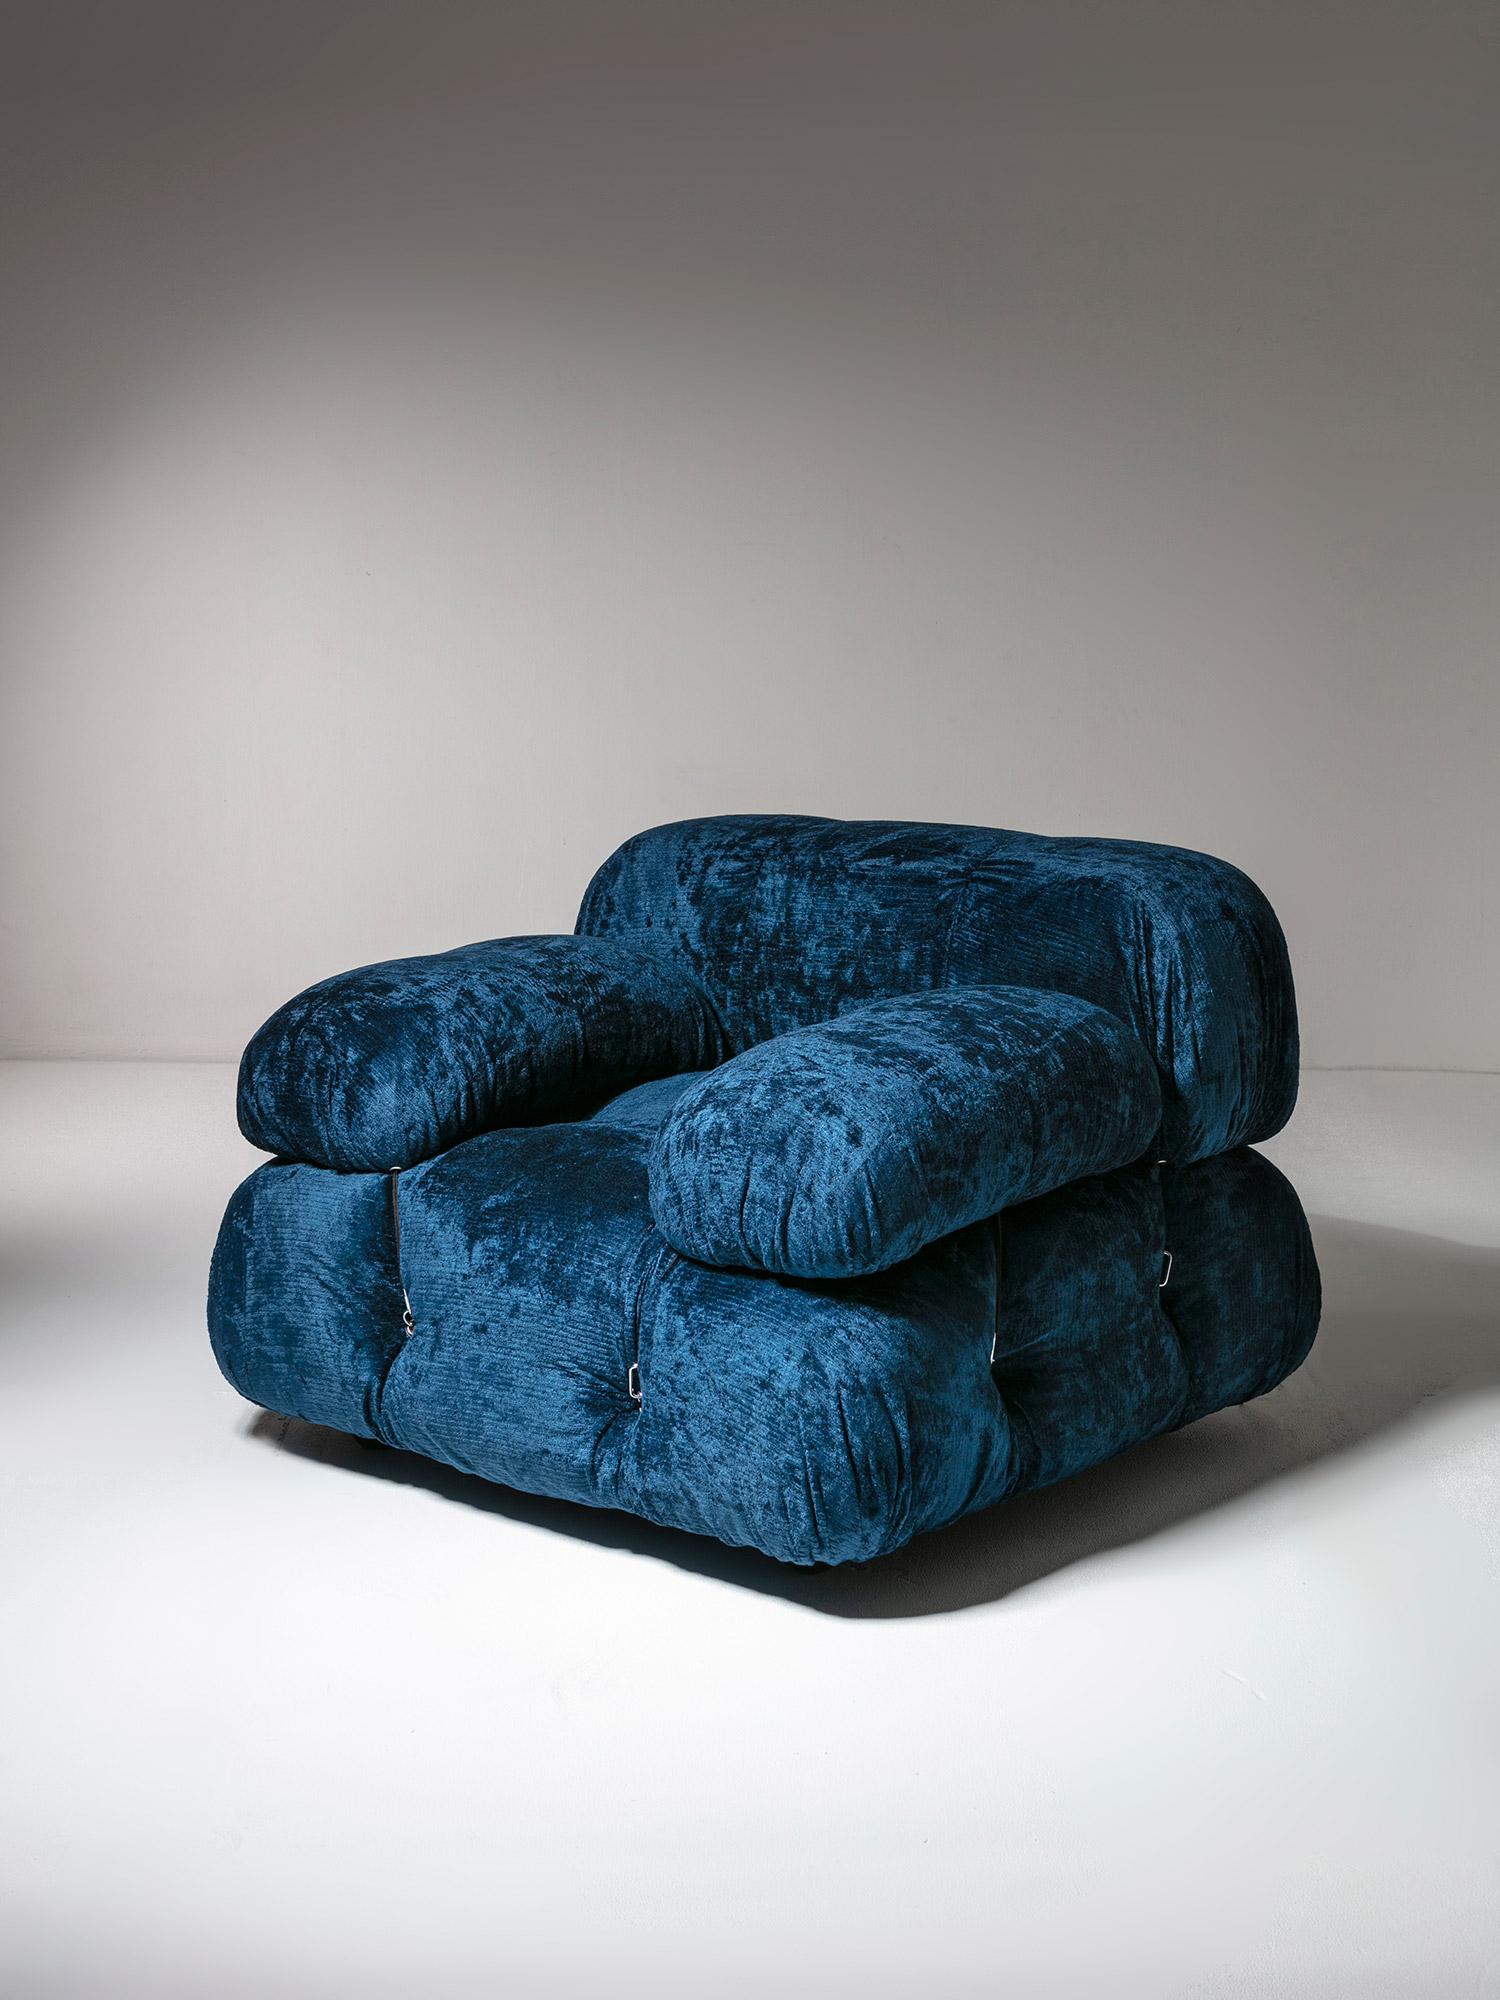 Rare Camaleonda lounge chair by Mario Bellini for B&B.
70s labelled edition featuring blue chenille covering.
Also available a matching sofa, check our inventory.